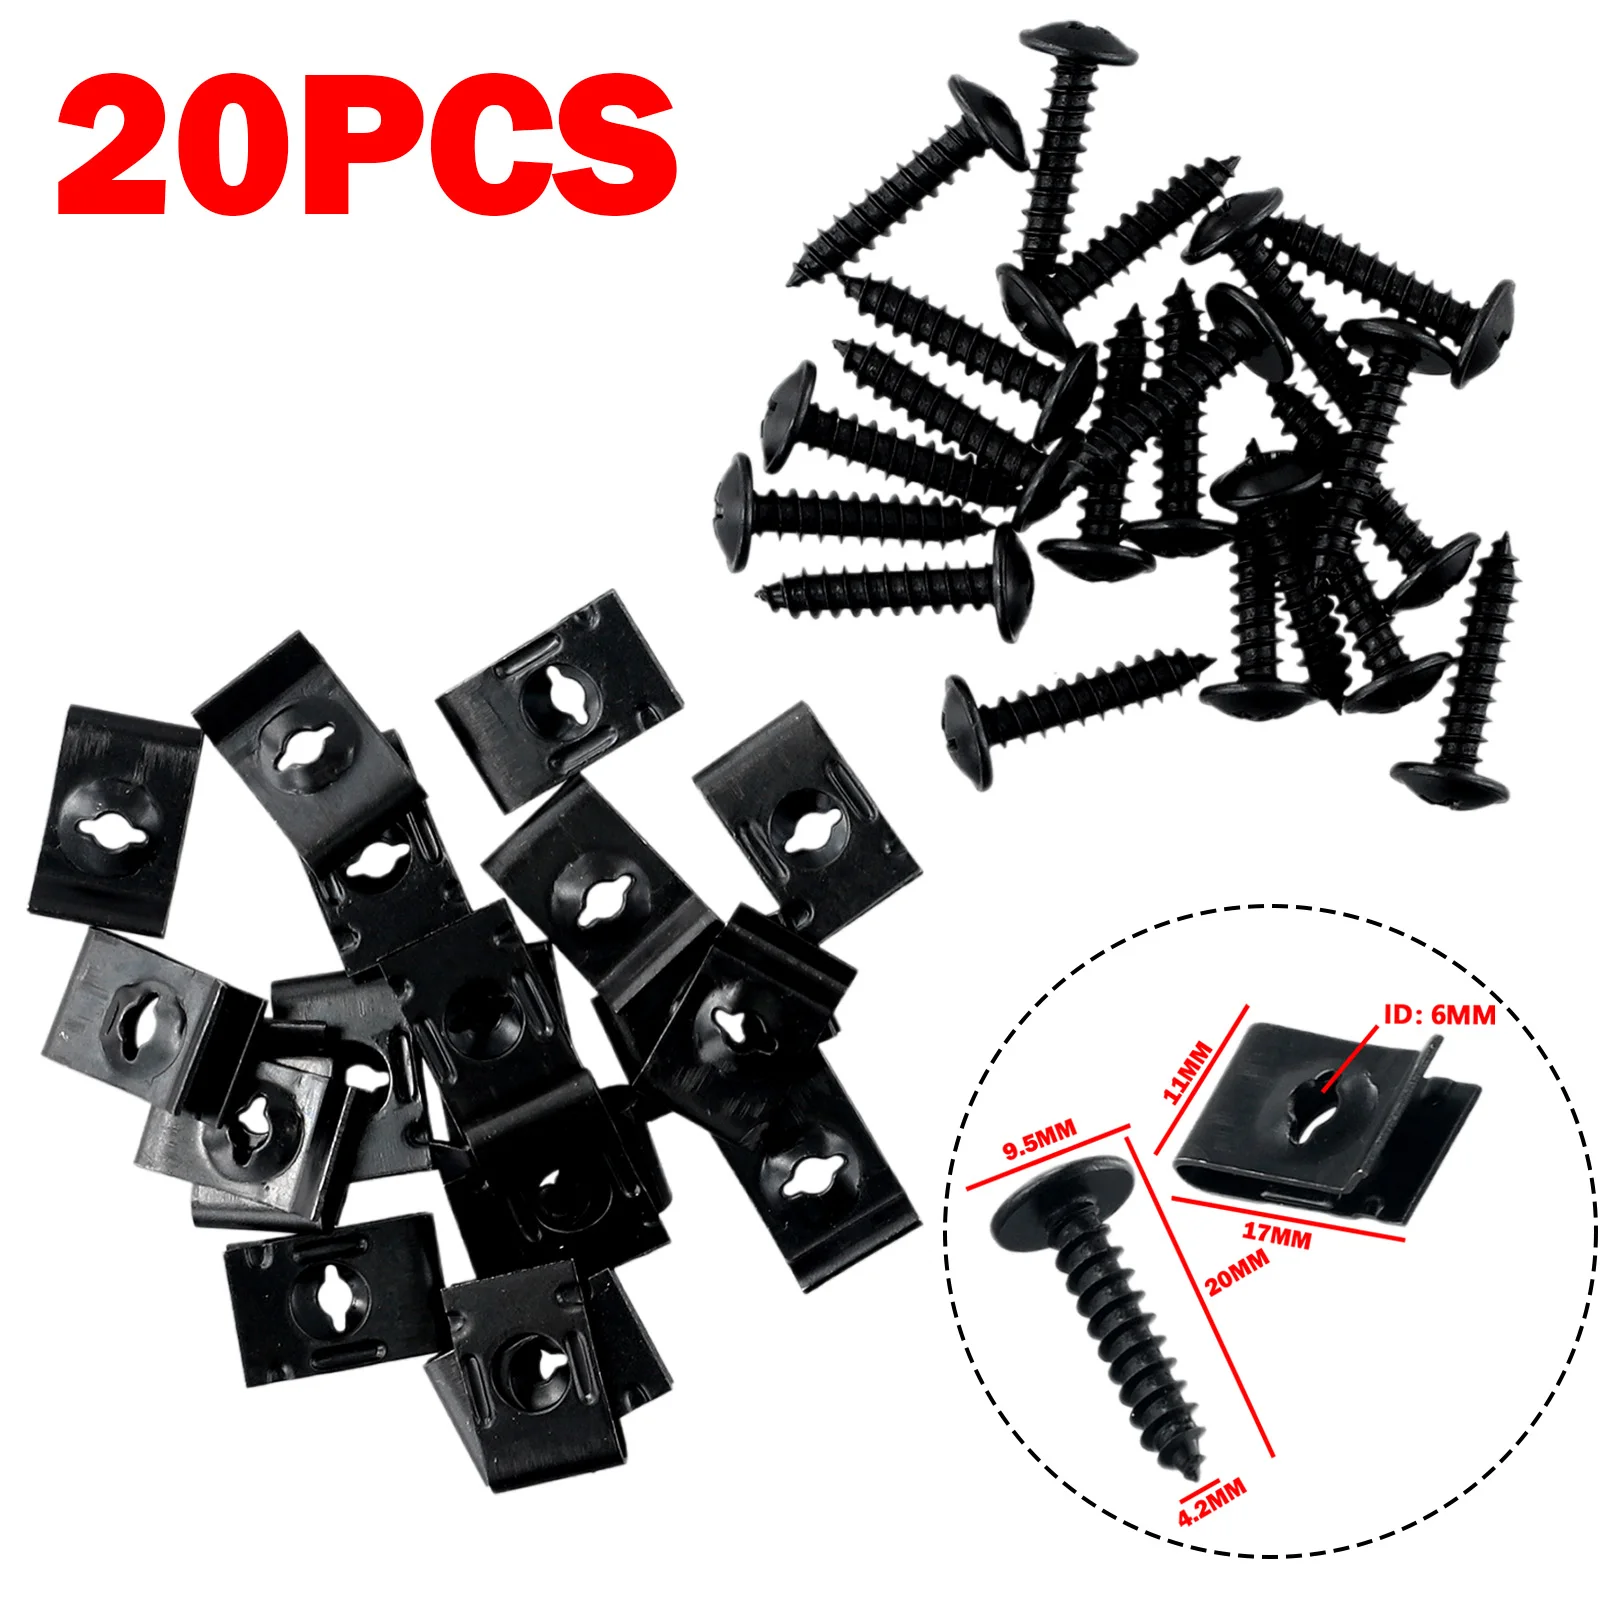 

20pcs Car U-type Clips&Screws For Fitting Side Skirts,bumpers And Other Trim Perfect To Replace Worn Out,damaged Or Broken Clips